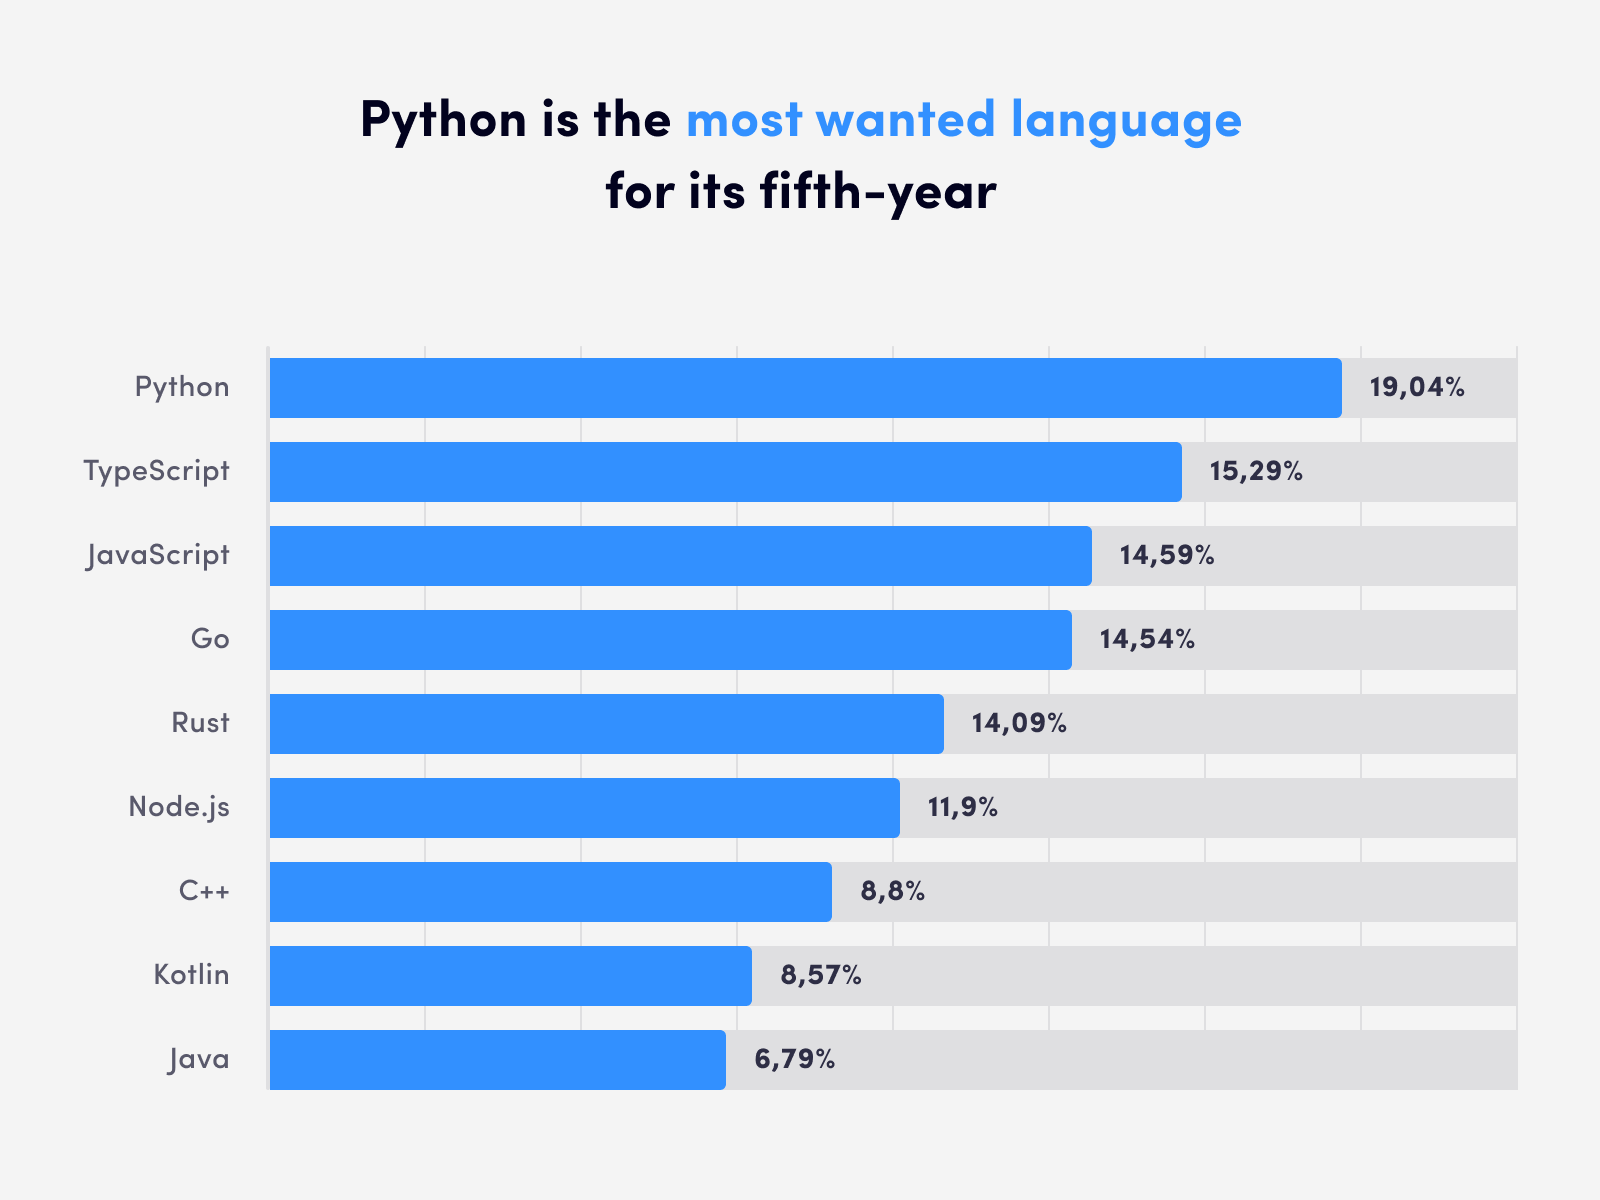 Python is the most wanted language for its fifth-year